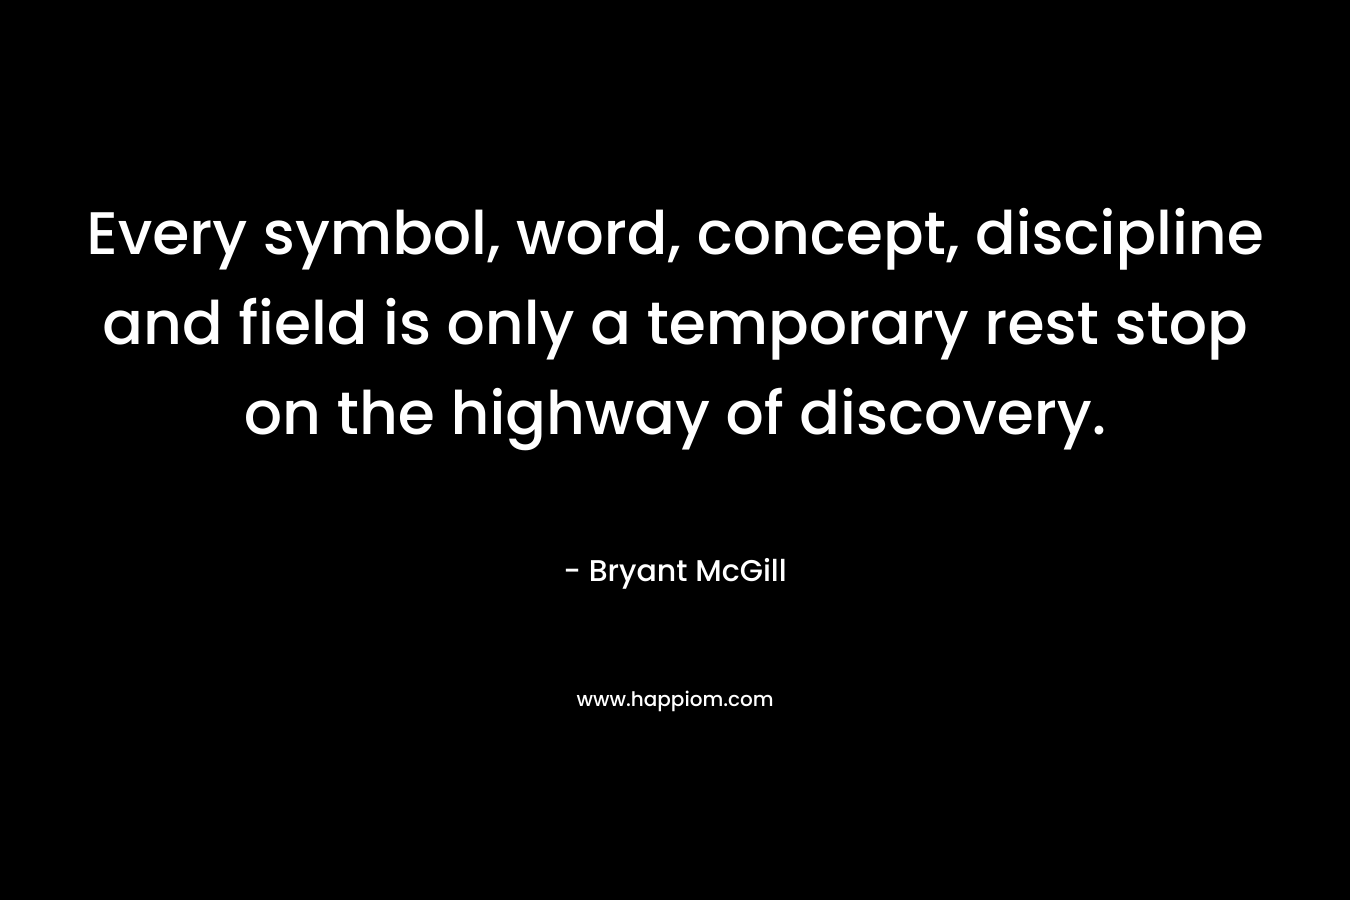 Every symbol, word, concept, discipline and field is only a temporary rest stop on the highway of discovery.